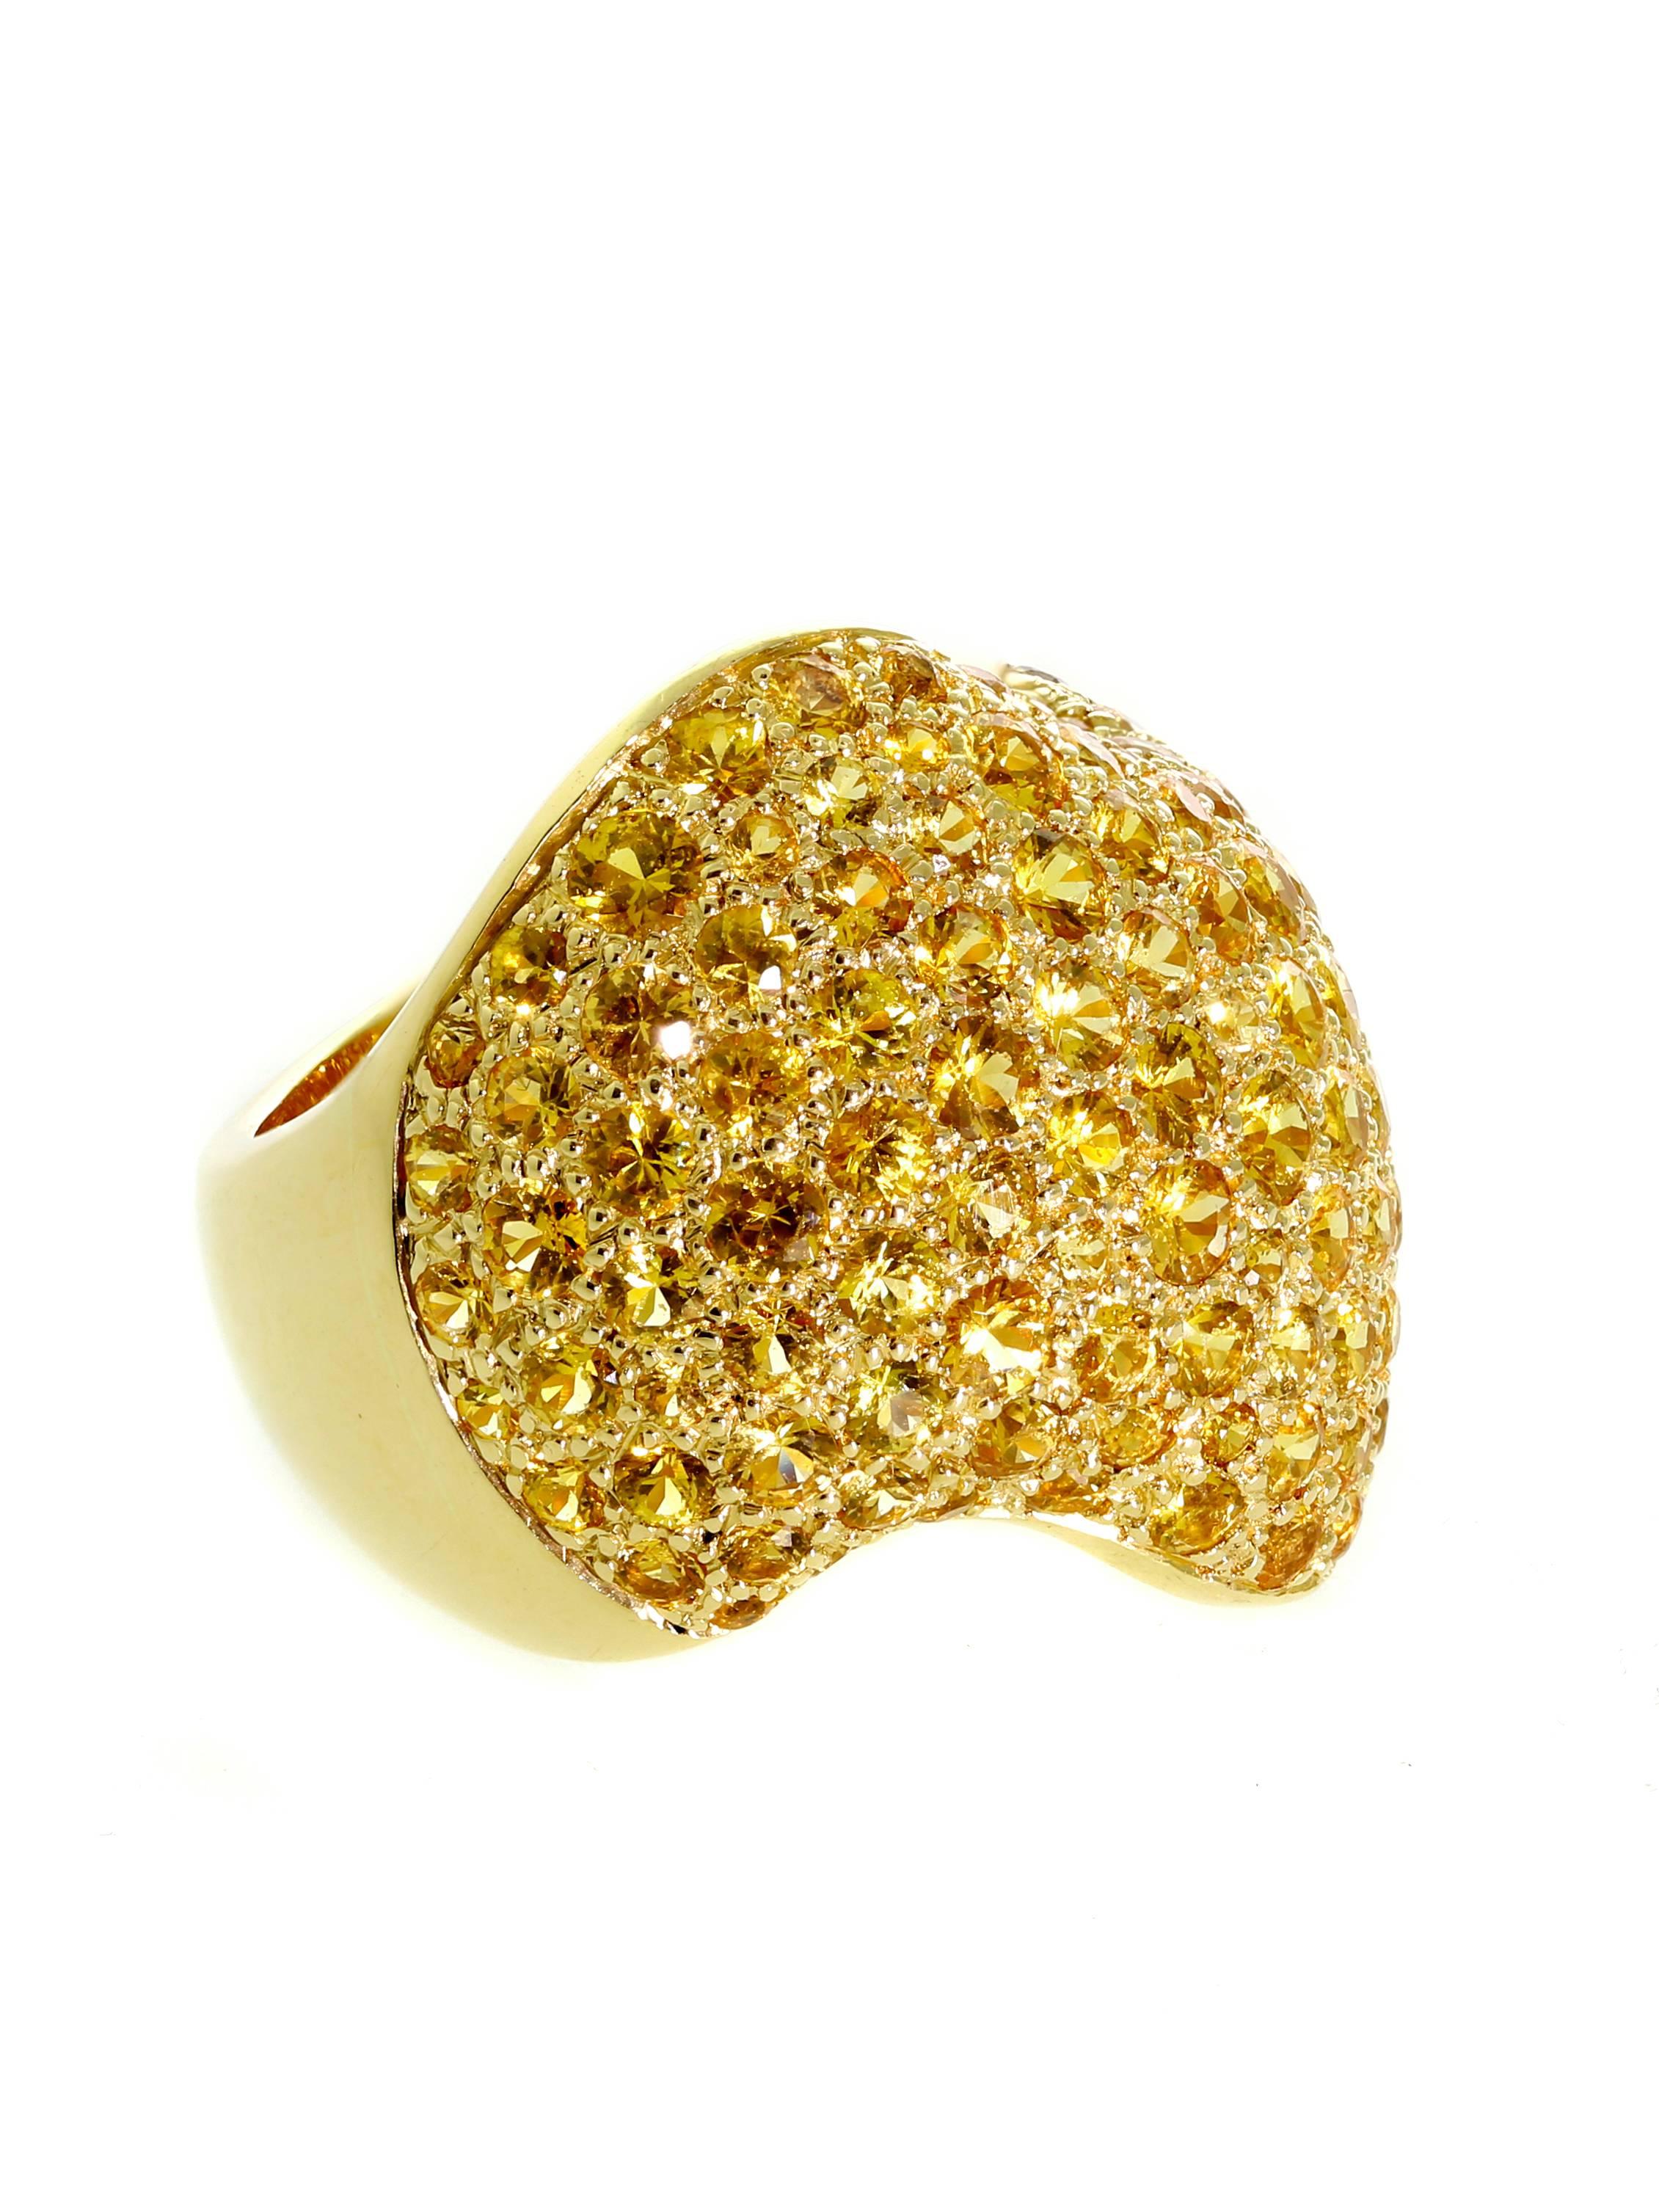 Van Cleef & Arpels Pave ring in 18k yellow gold set with beautiful golden yellow sapphires in an intricate swirling design 1" in width.

Size: US 5 1/4 / EU 50 (Resizeable)

Inventory ID: 0000226